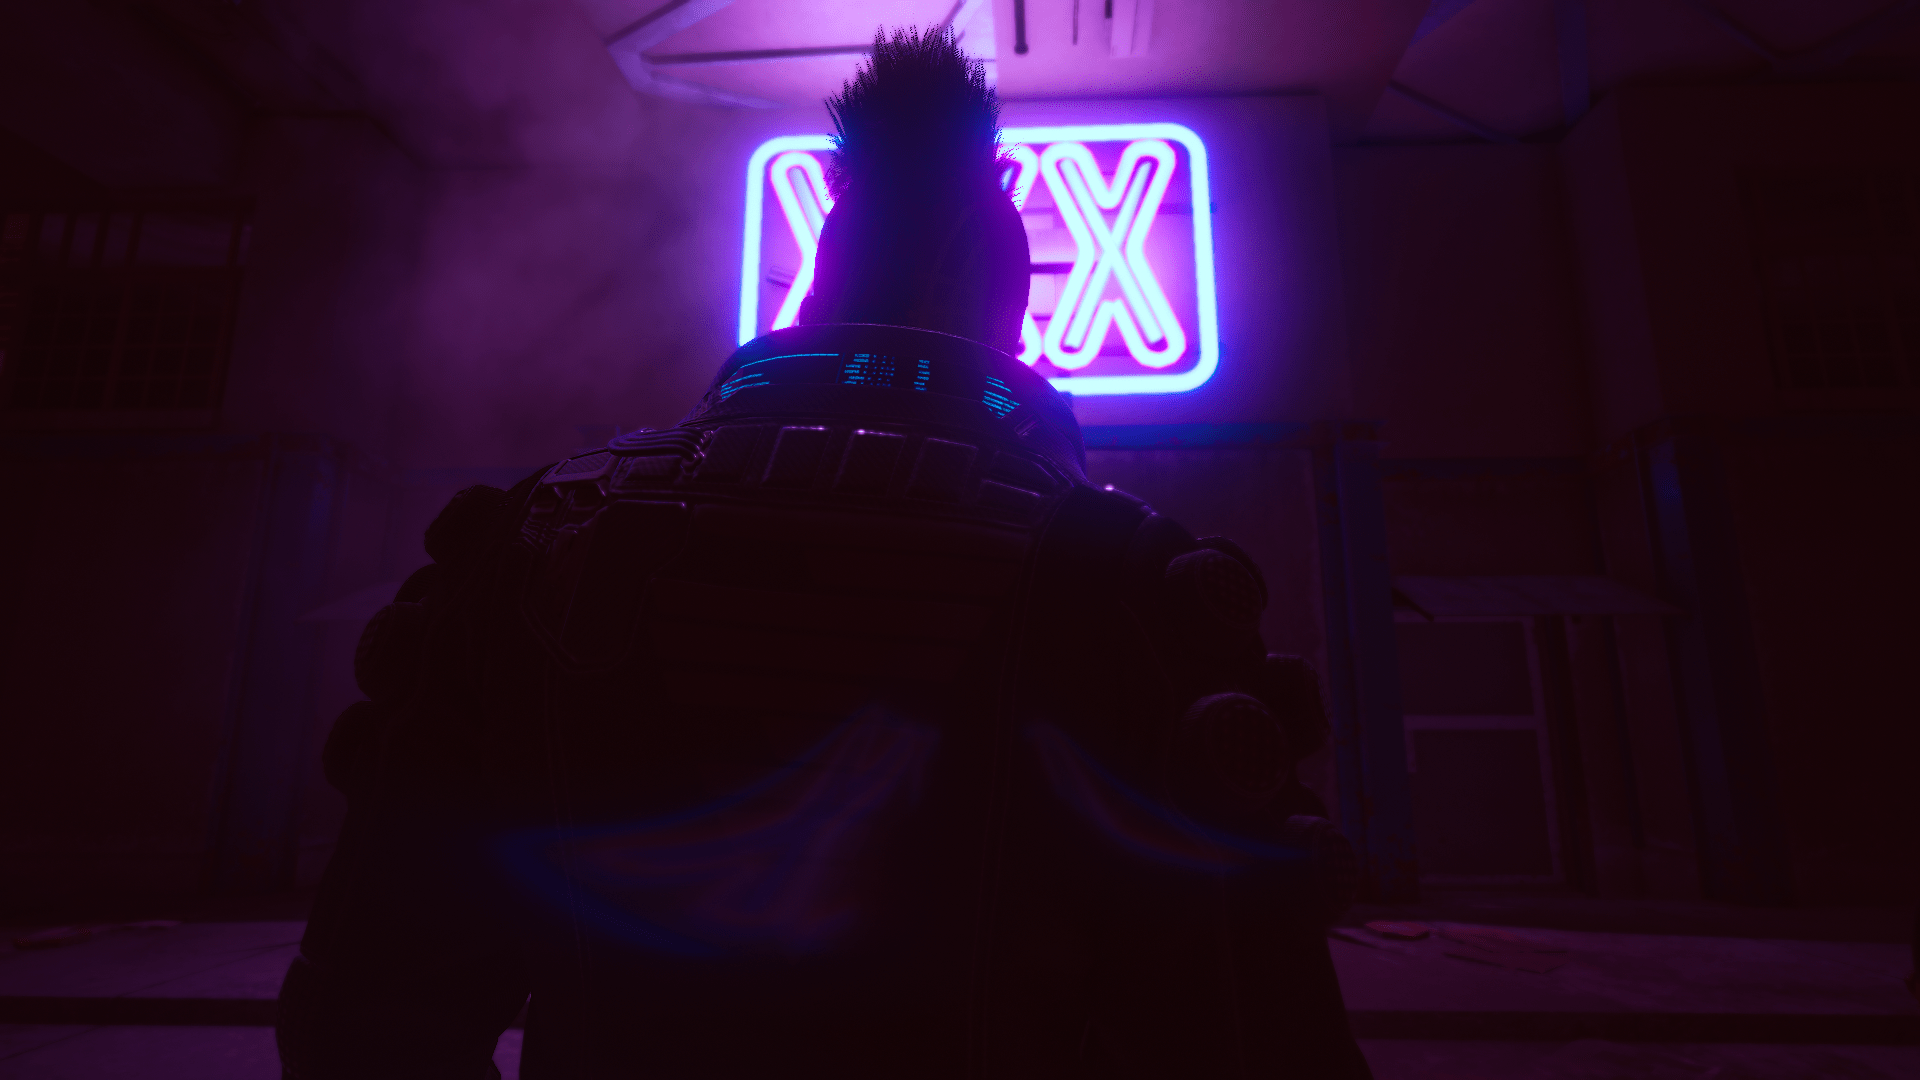 Some Cyberpunk 2077 wallpaper I made a while ago in photomode [1920x1080]